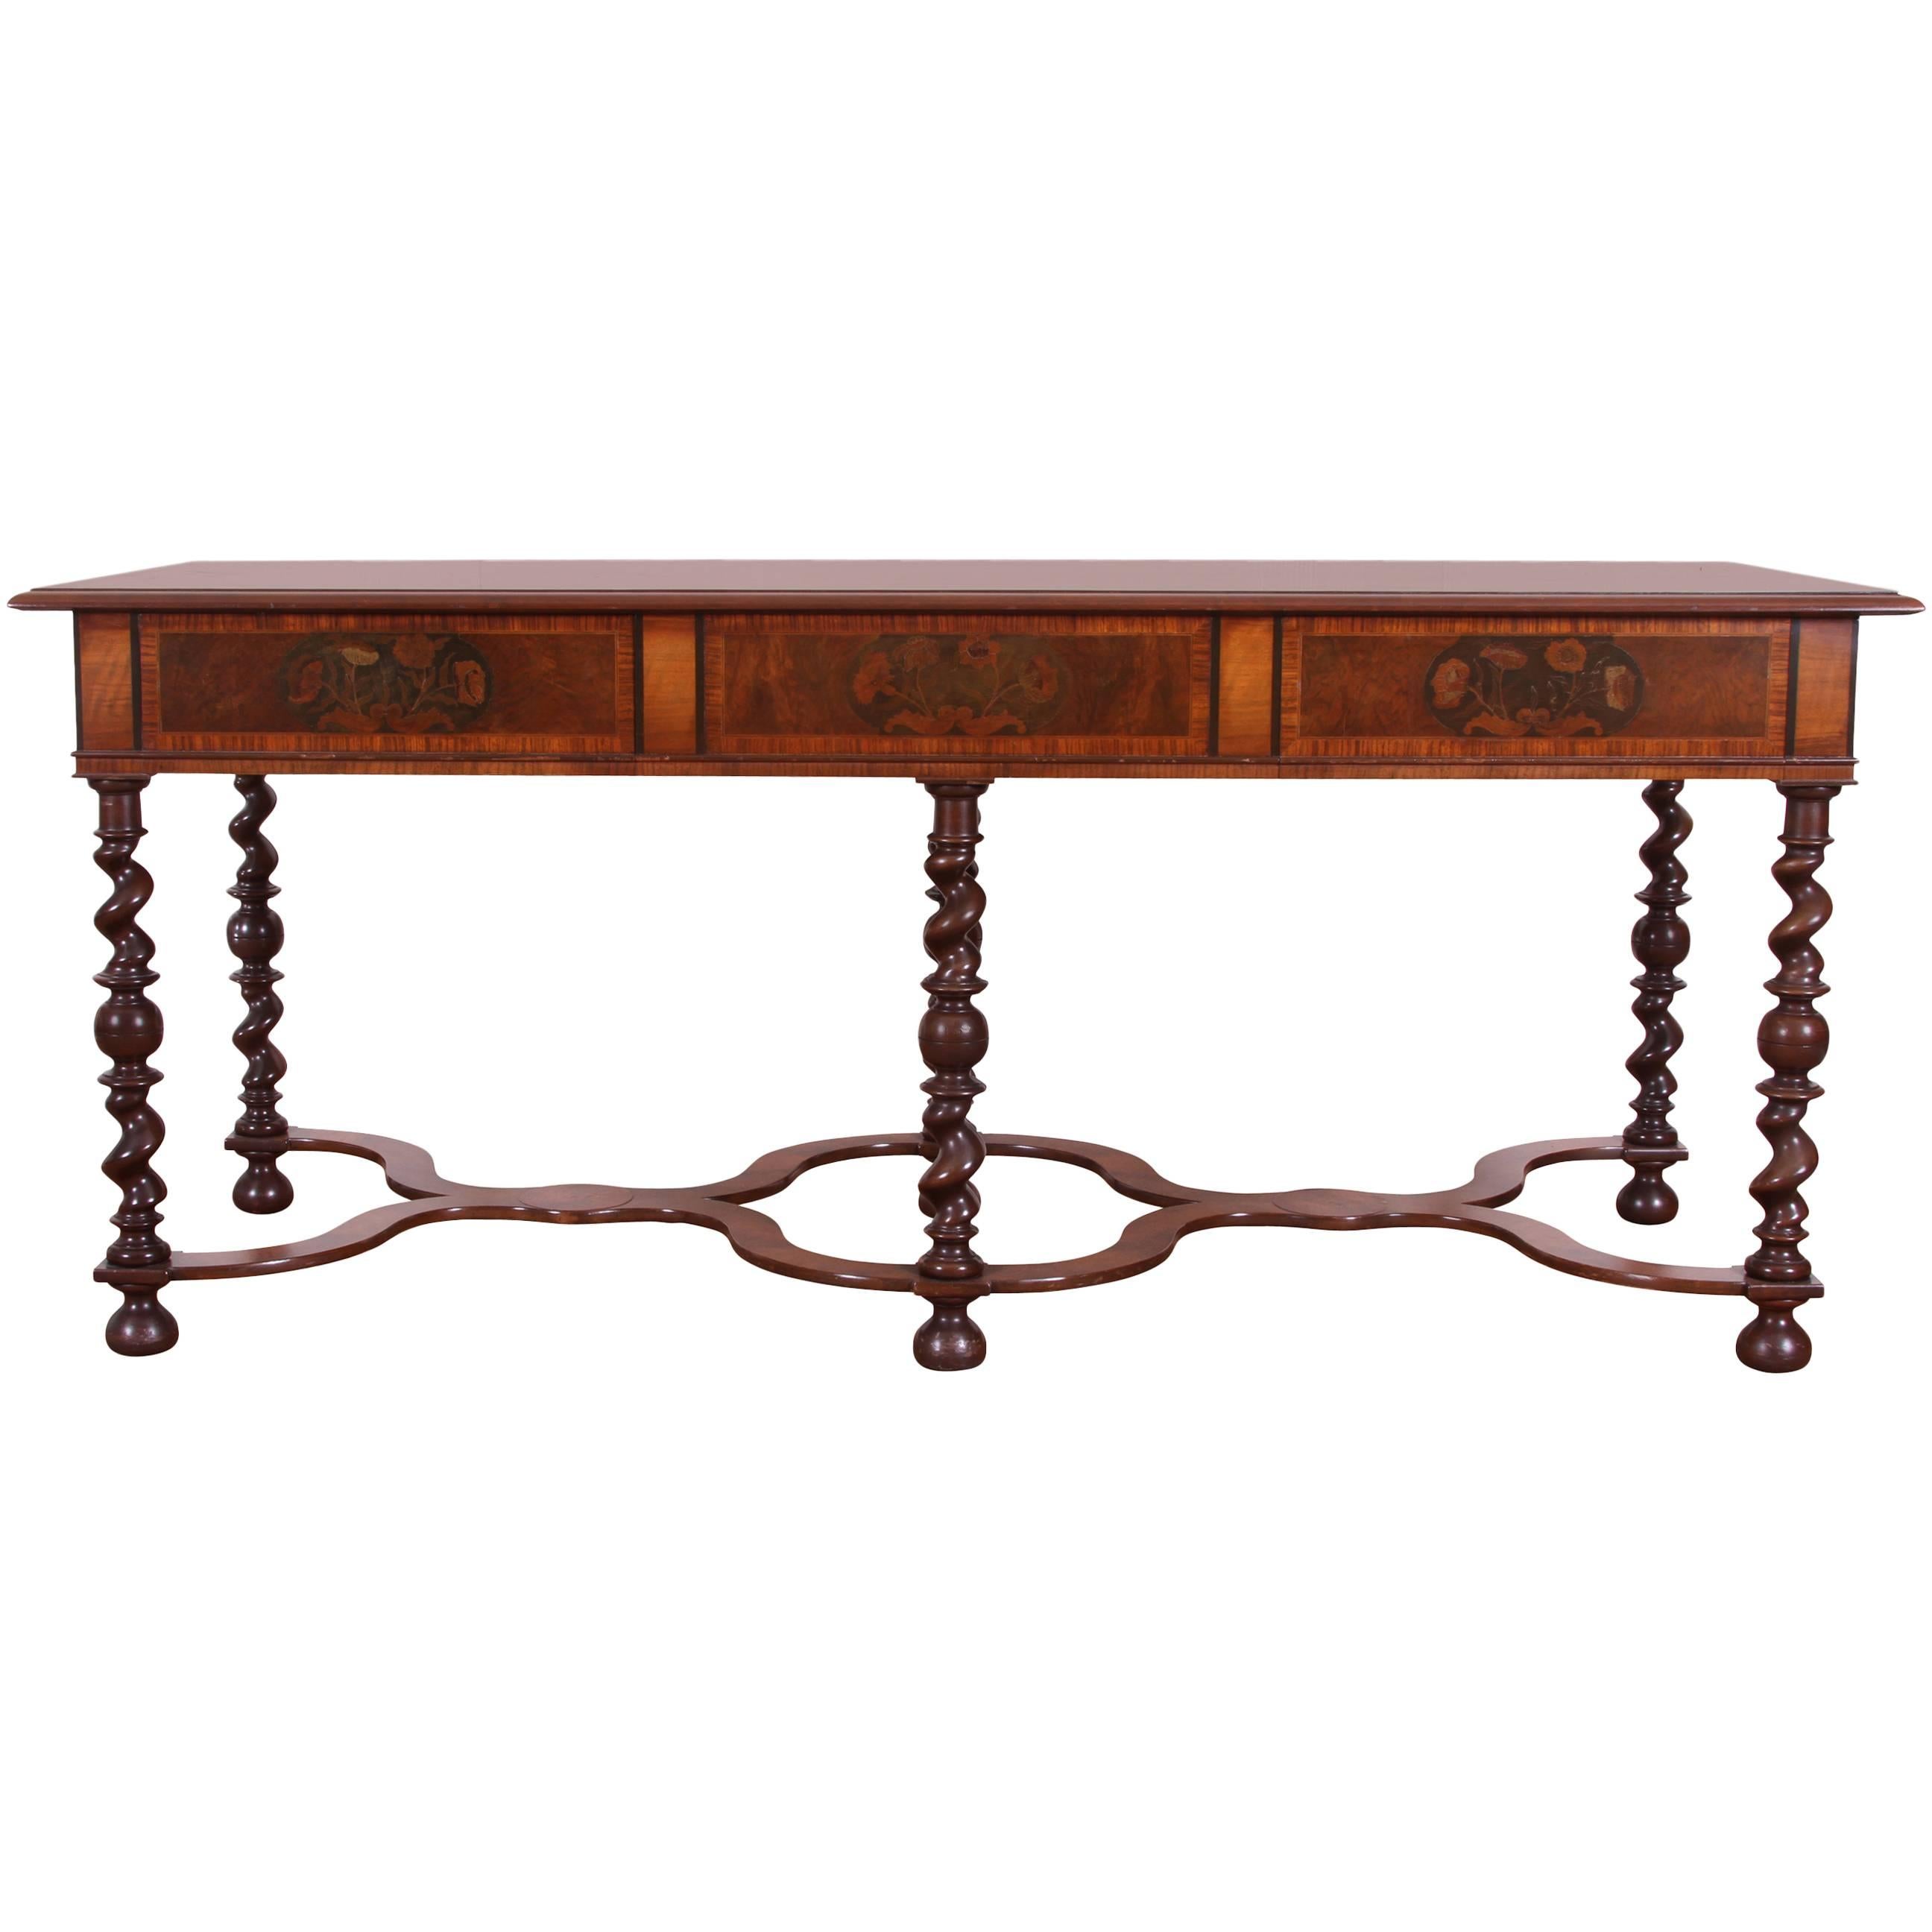 Inlaid Walnut William and Mary Console Table with Barley-Twist Base